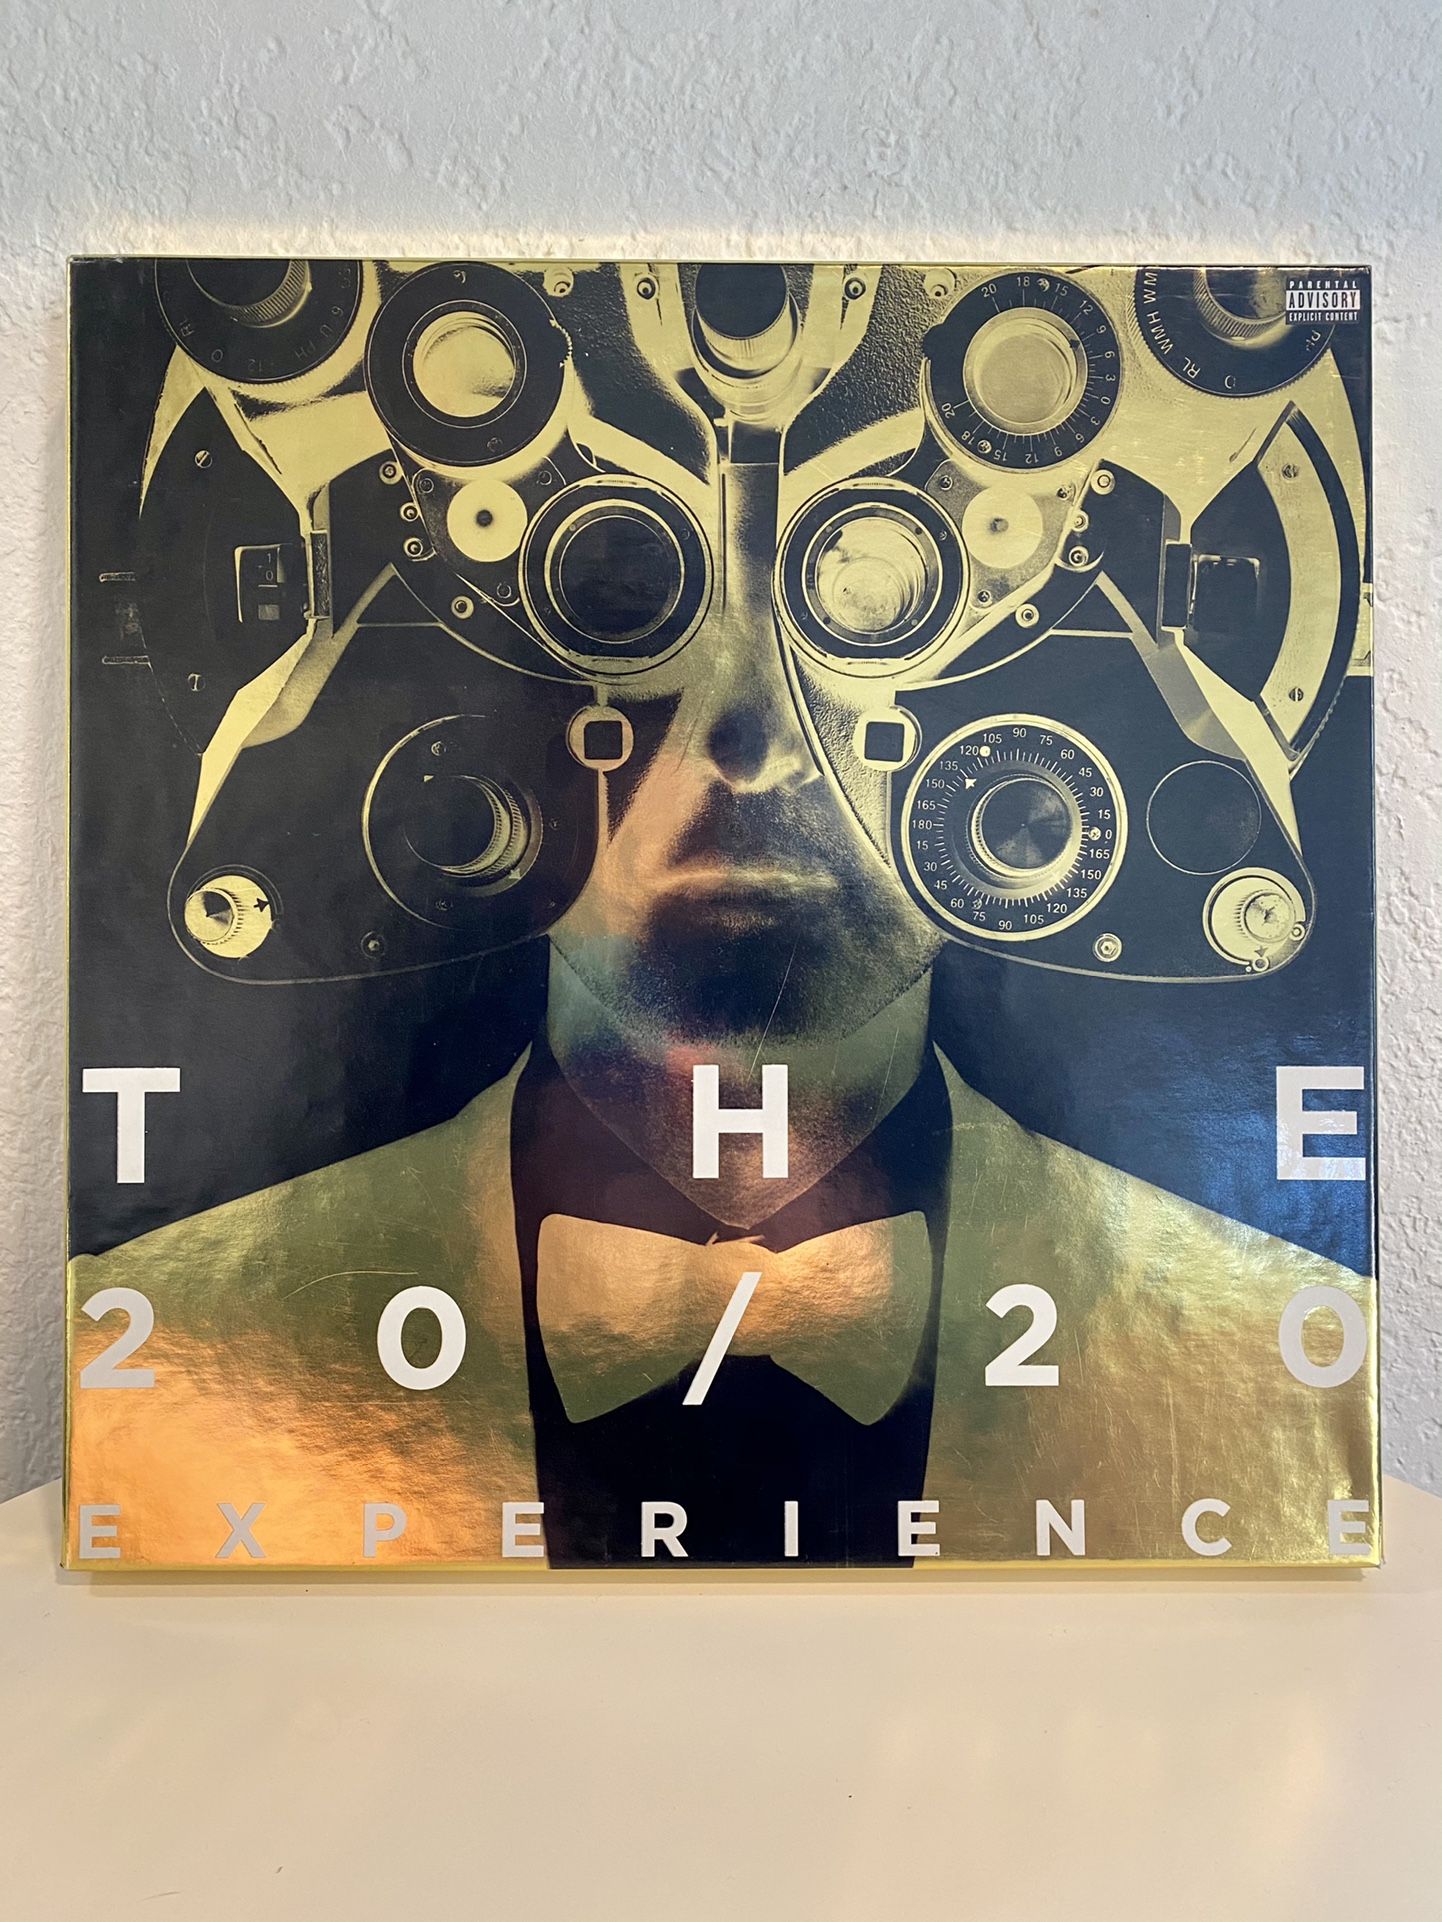 The Complete 20/20 Experience - Justin Timberlake Vinyl Record LP